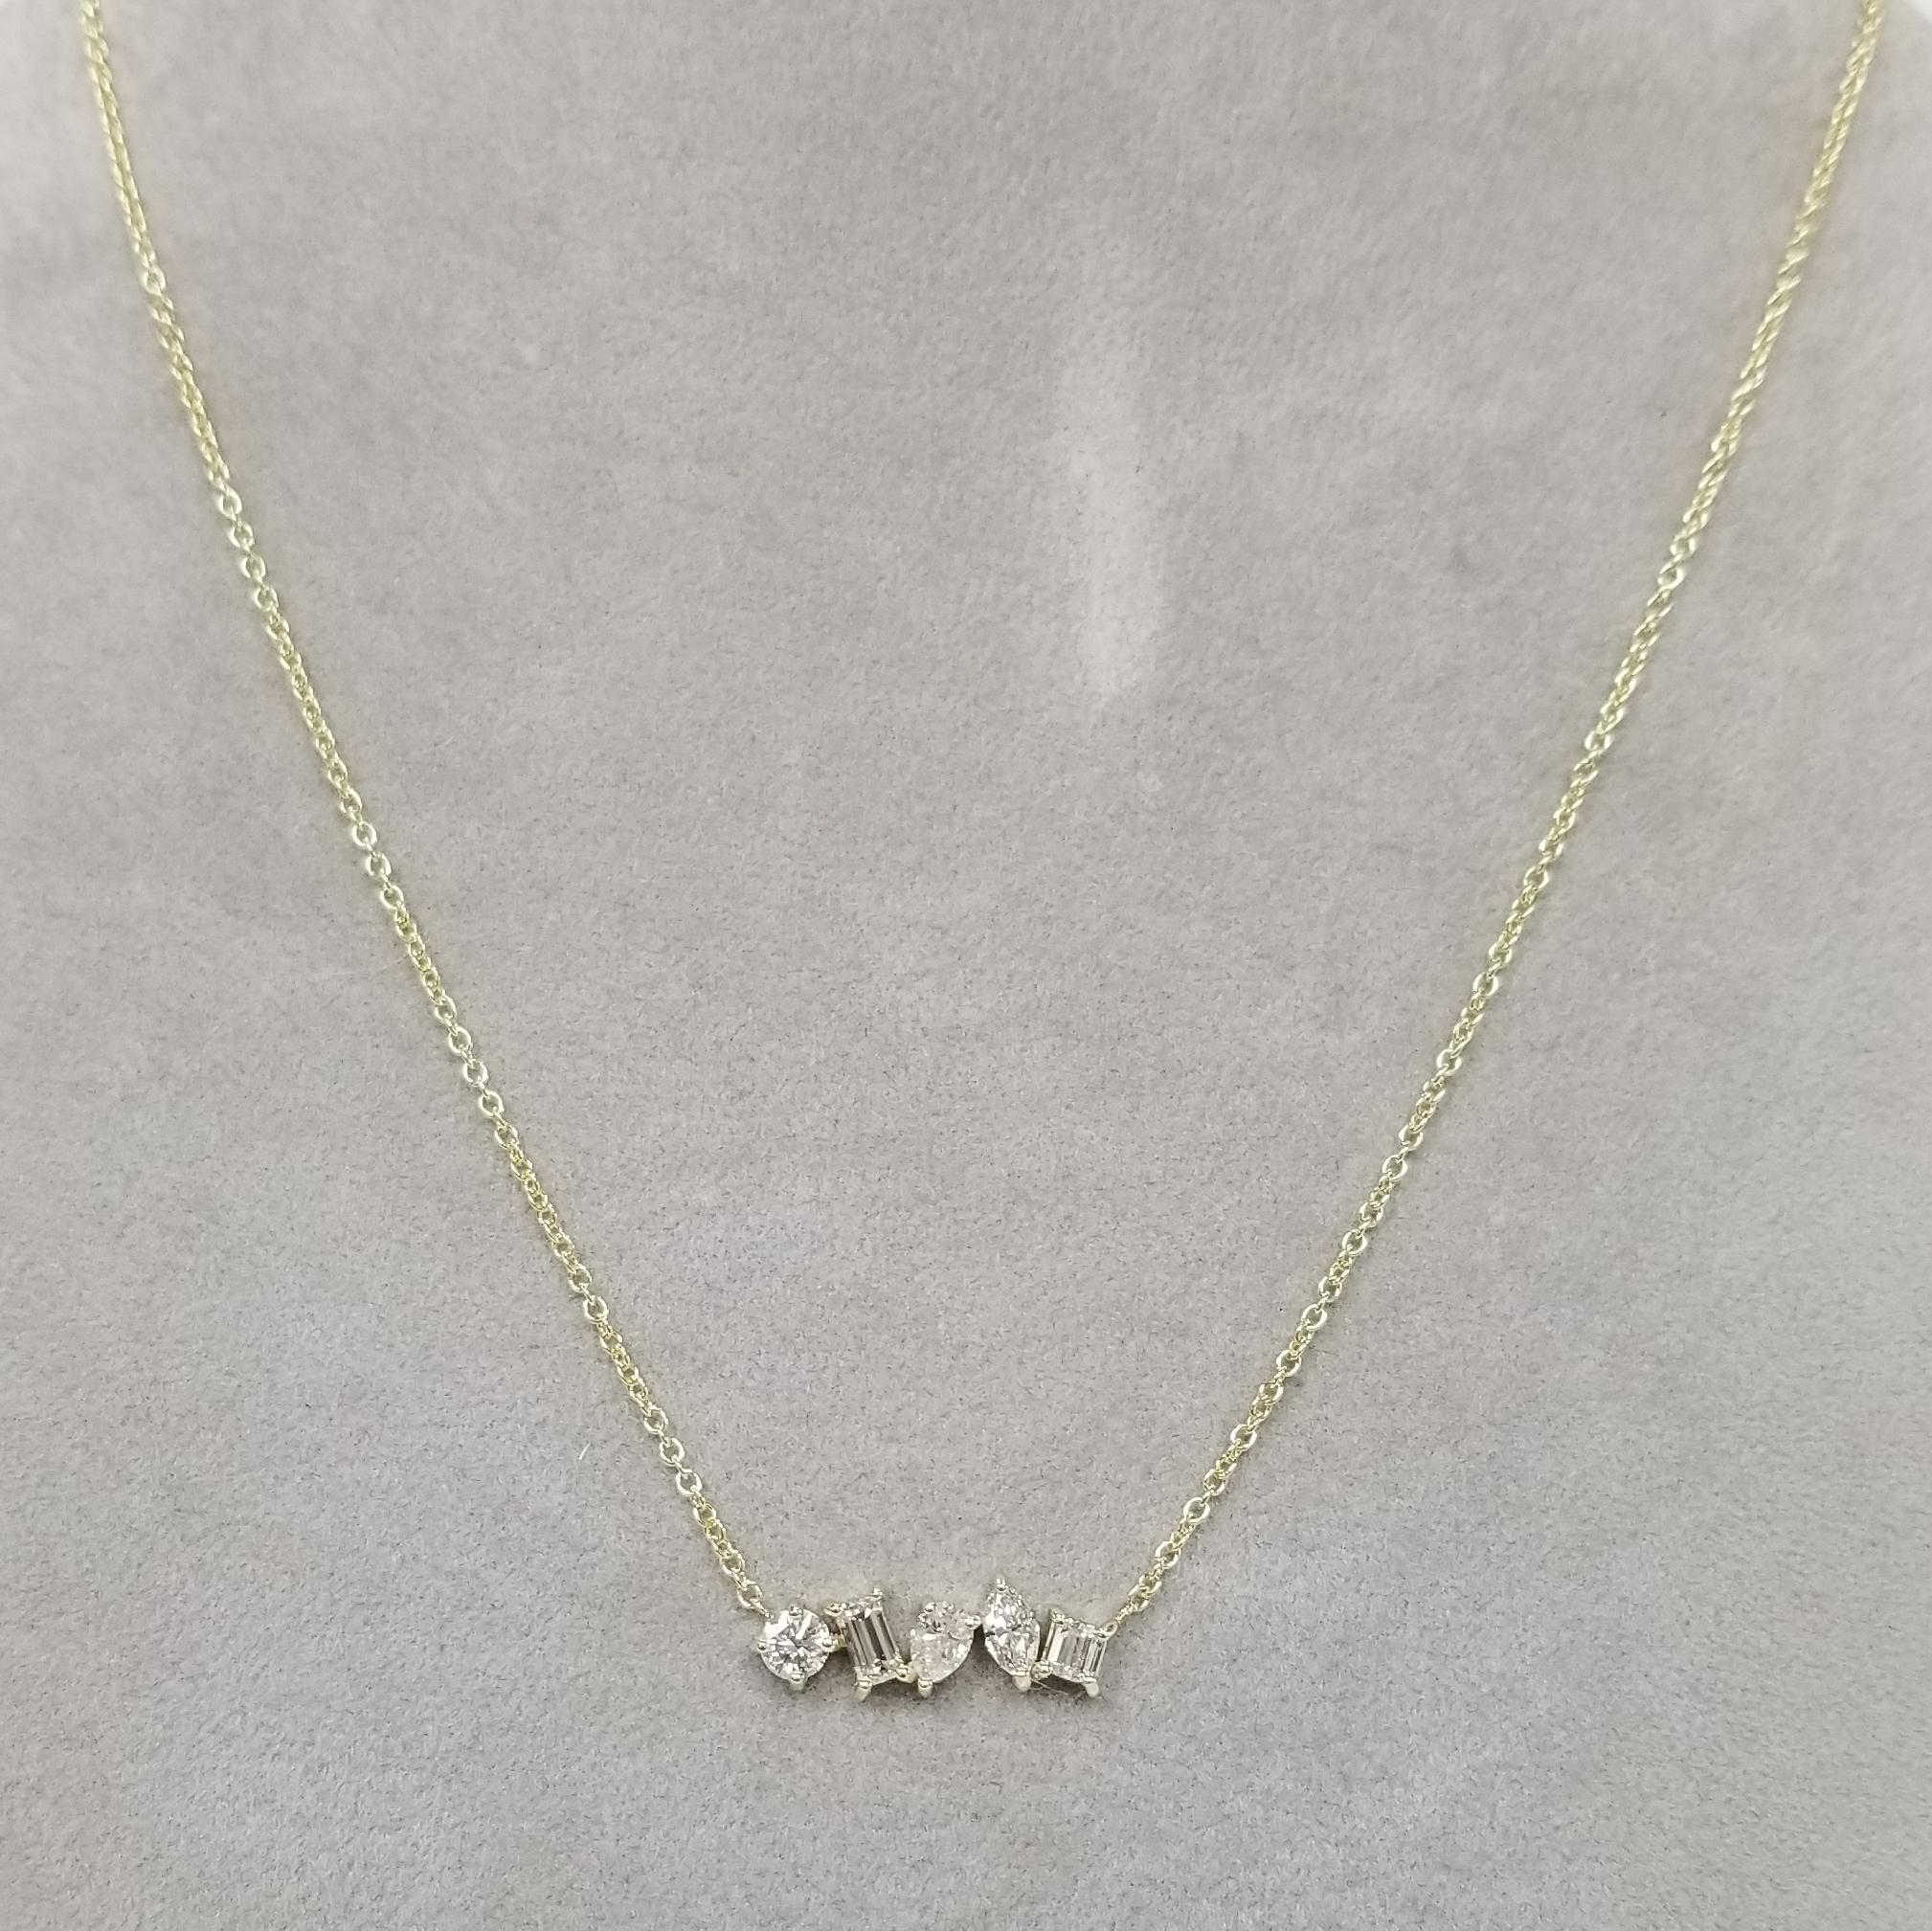 14k yellow gold 5 different cut  prong set diamond necklace with 1.18cts. in diamonds
Specifications:
    main stone: ROUND DIAMONDS
    SIDE STONE: 5 PCS ROUND CUT DIAMONDS
    carat total weight: 1.18 CTW
    color: G
    clarity: VS2-SI1
   